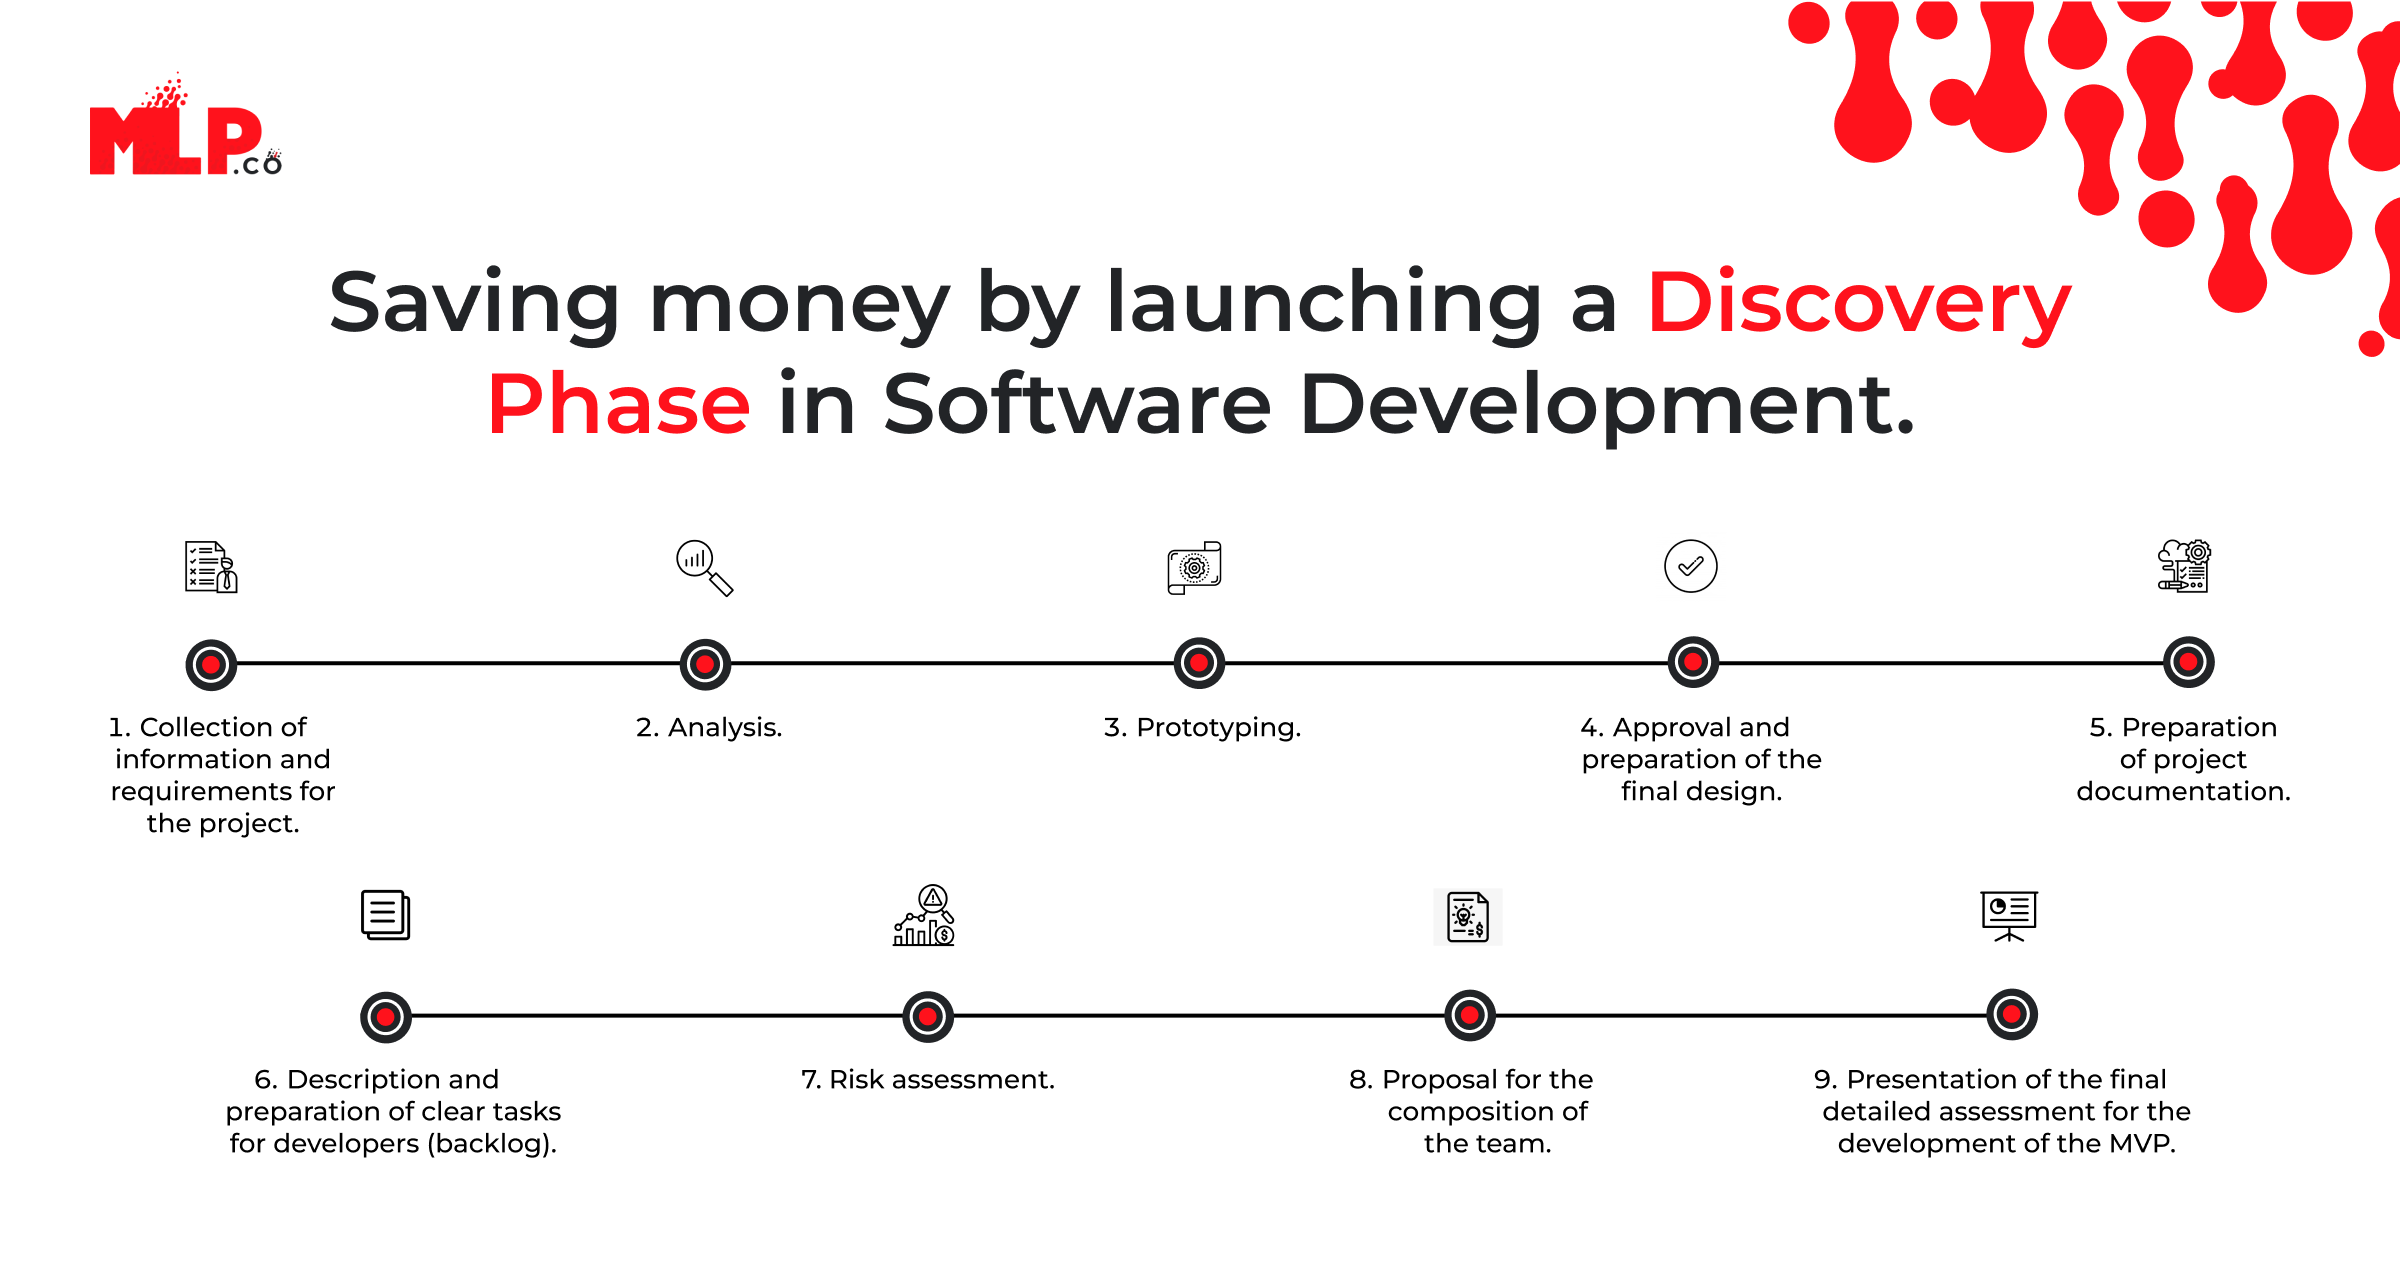 Saving money by launching a Discovery Phase in Software Development